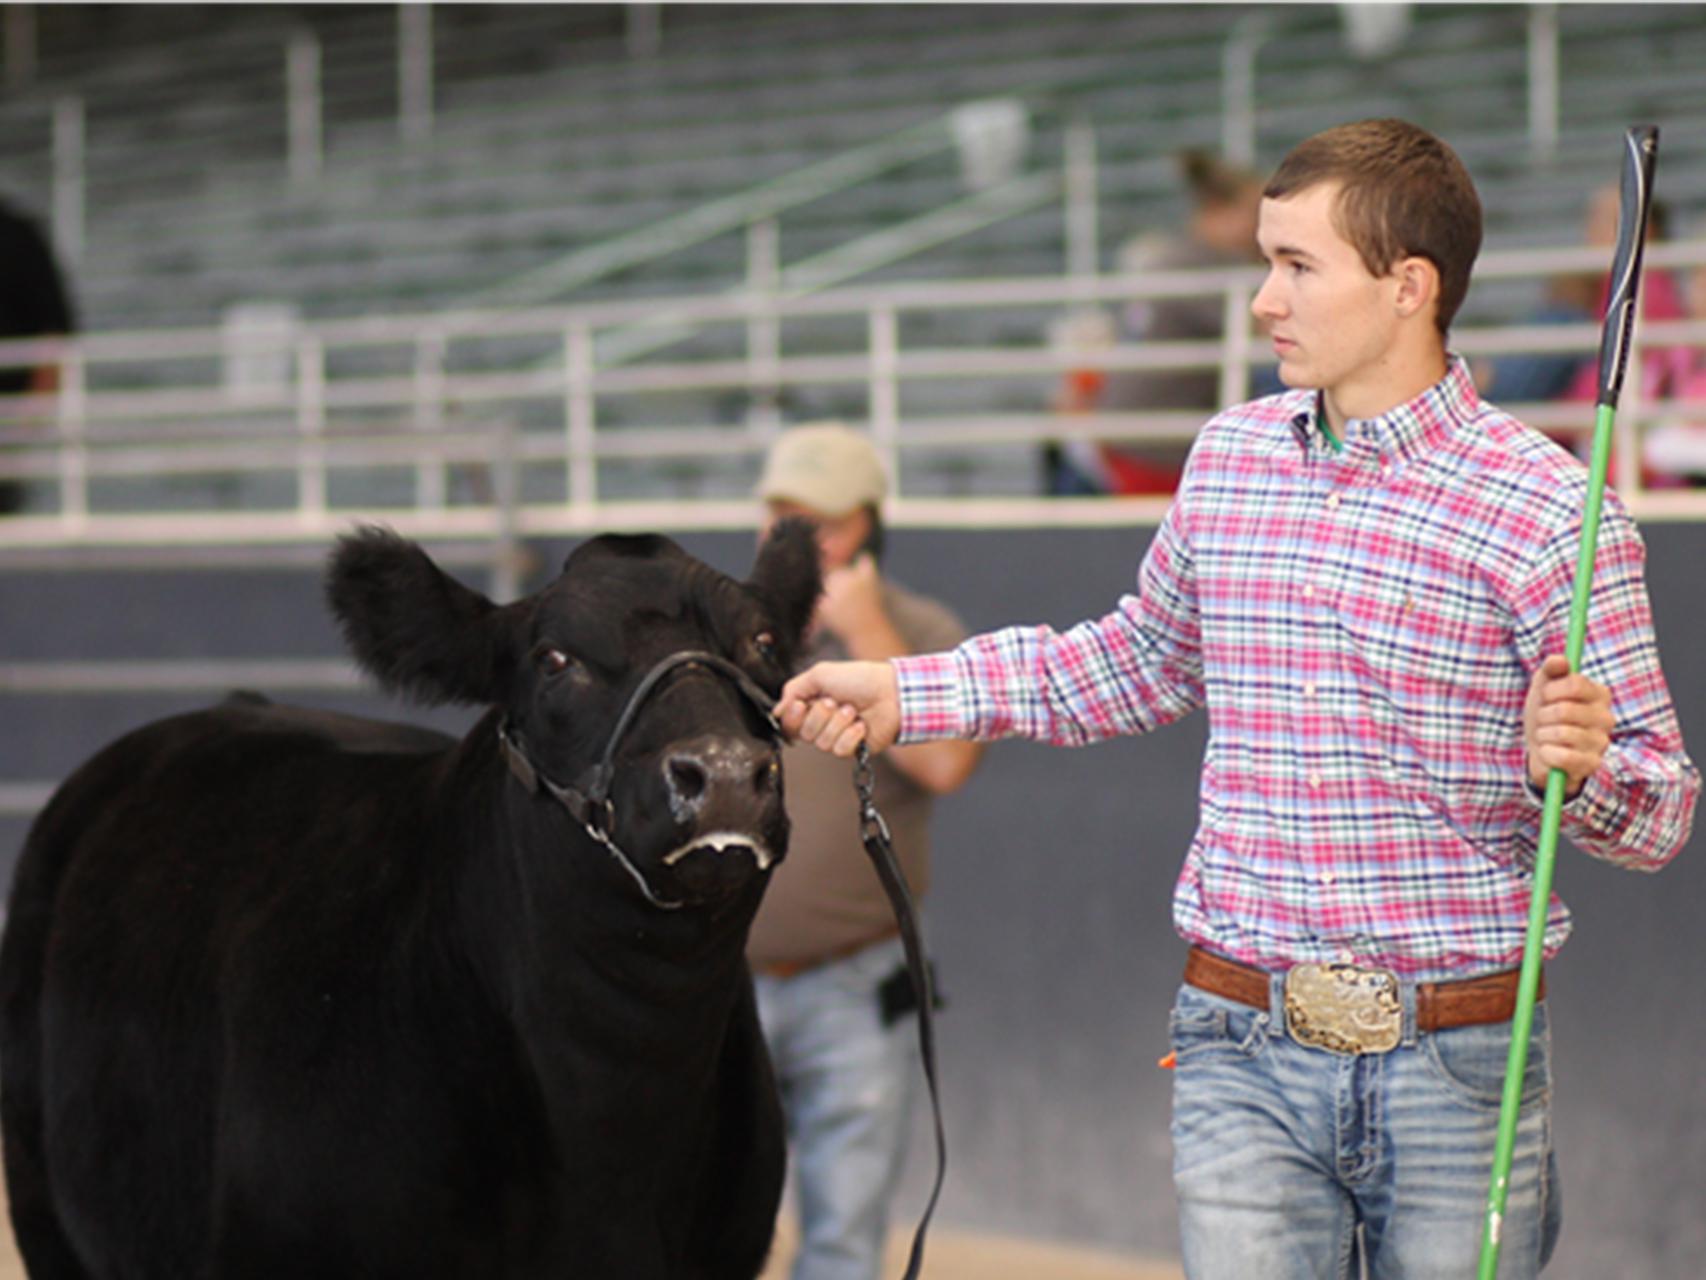 Jones County 4-H member Rustin Anderson, 17, exhibits his grand champion Brangus heifer on Oct. 22, 2016 at the State Fair in Jackson, Mississippi. (Submitted photo by Brianna Stroud)